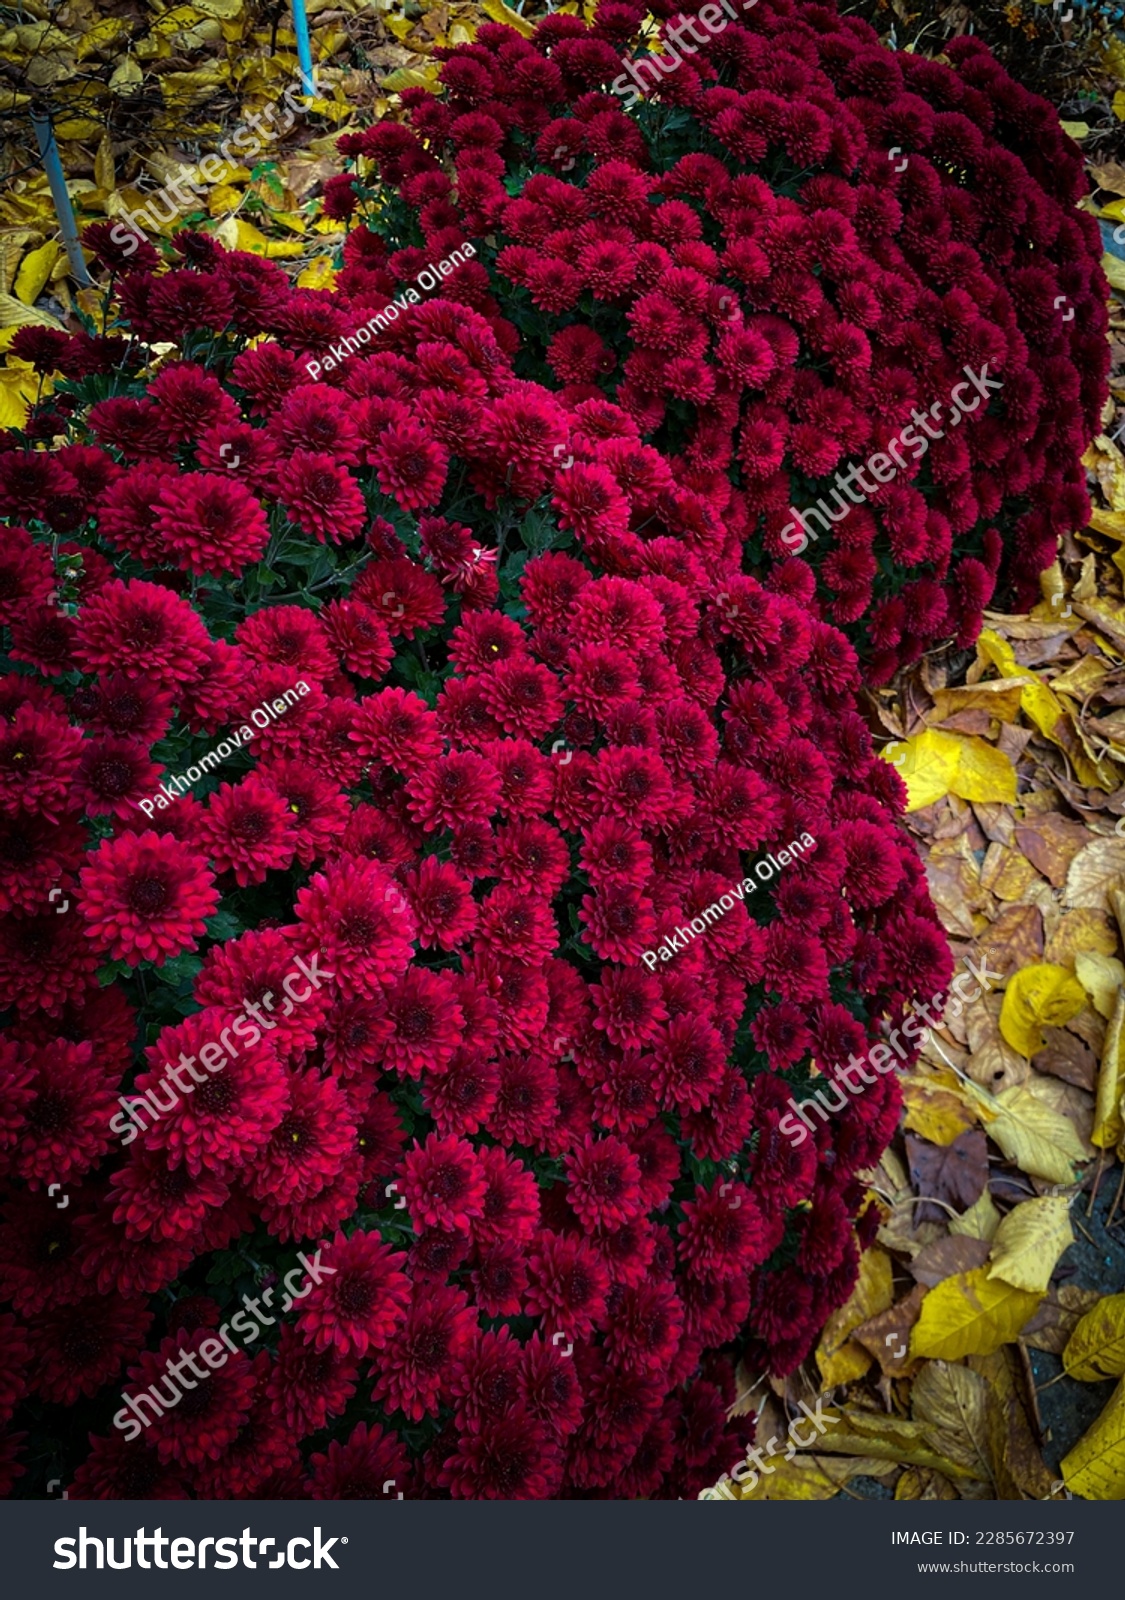 Autumn flowers of Chrysanthemum multiflora. Spherical burgundy bushes surrounded by yellow fallen leaves. #2285672397